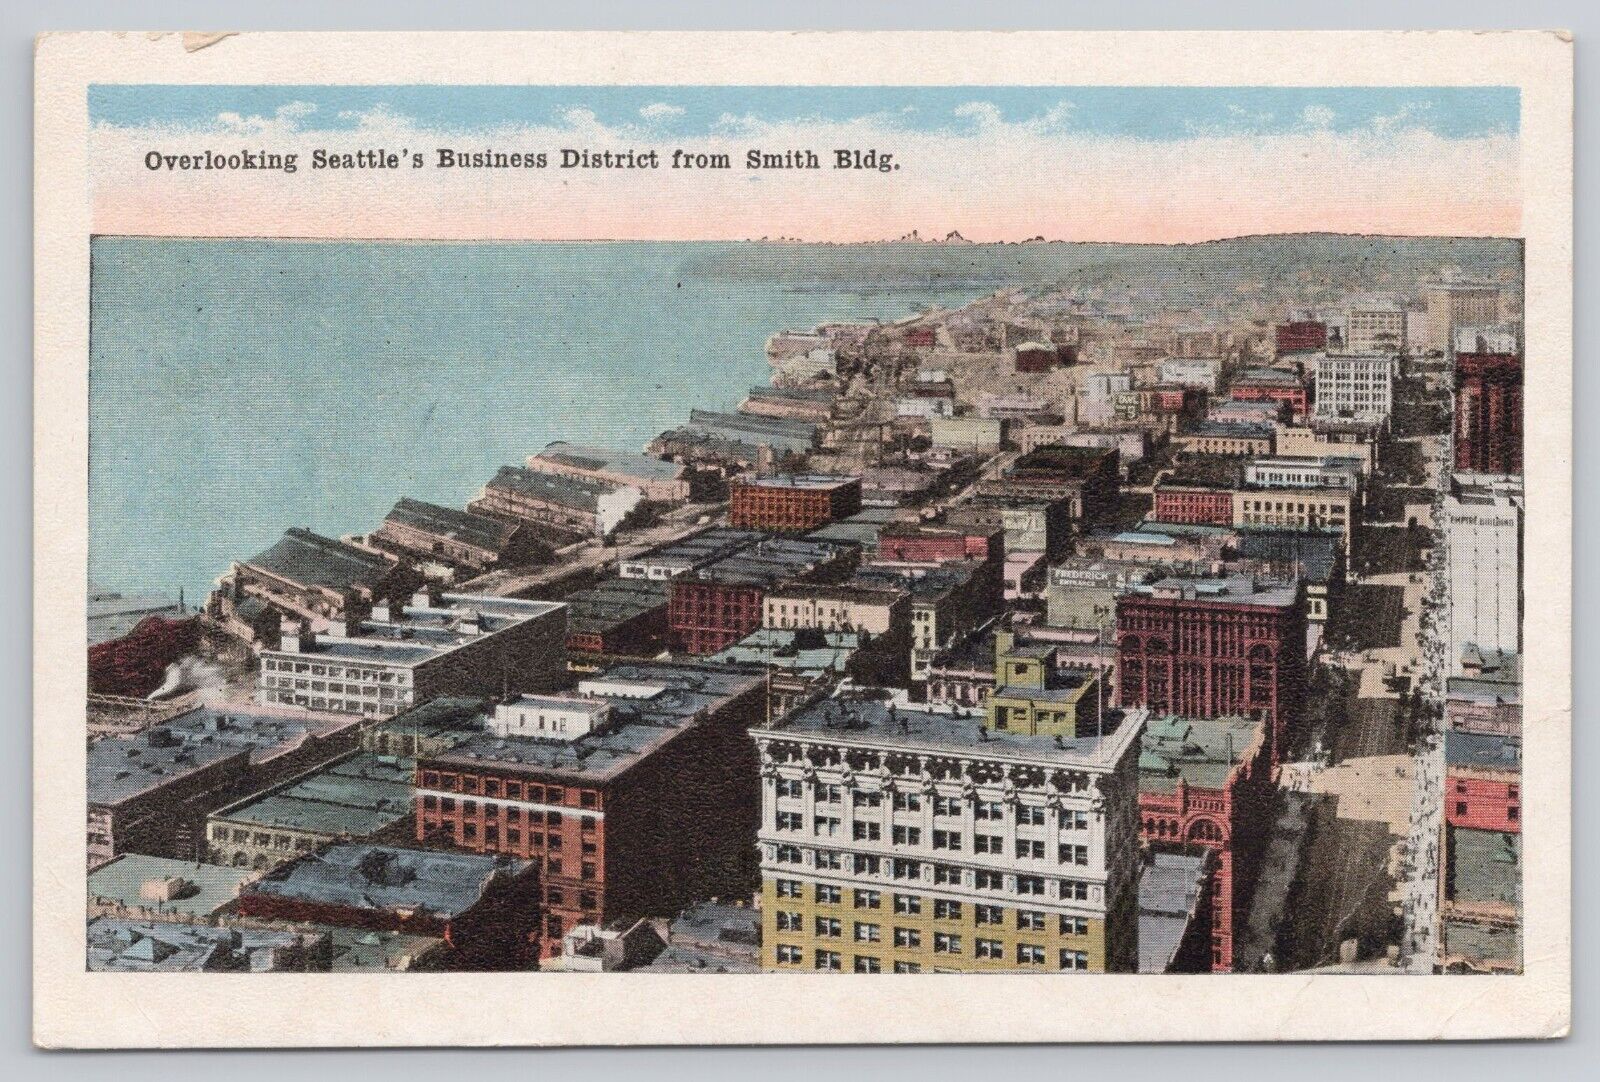 Vtg Post Card Overlooking Seattle's Business District from Smith Bldg. D336